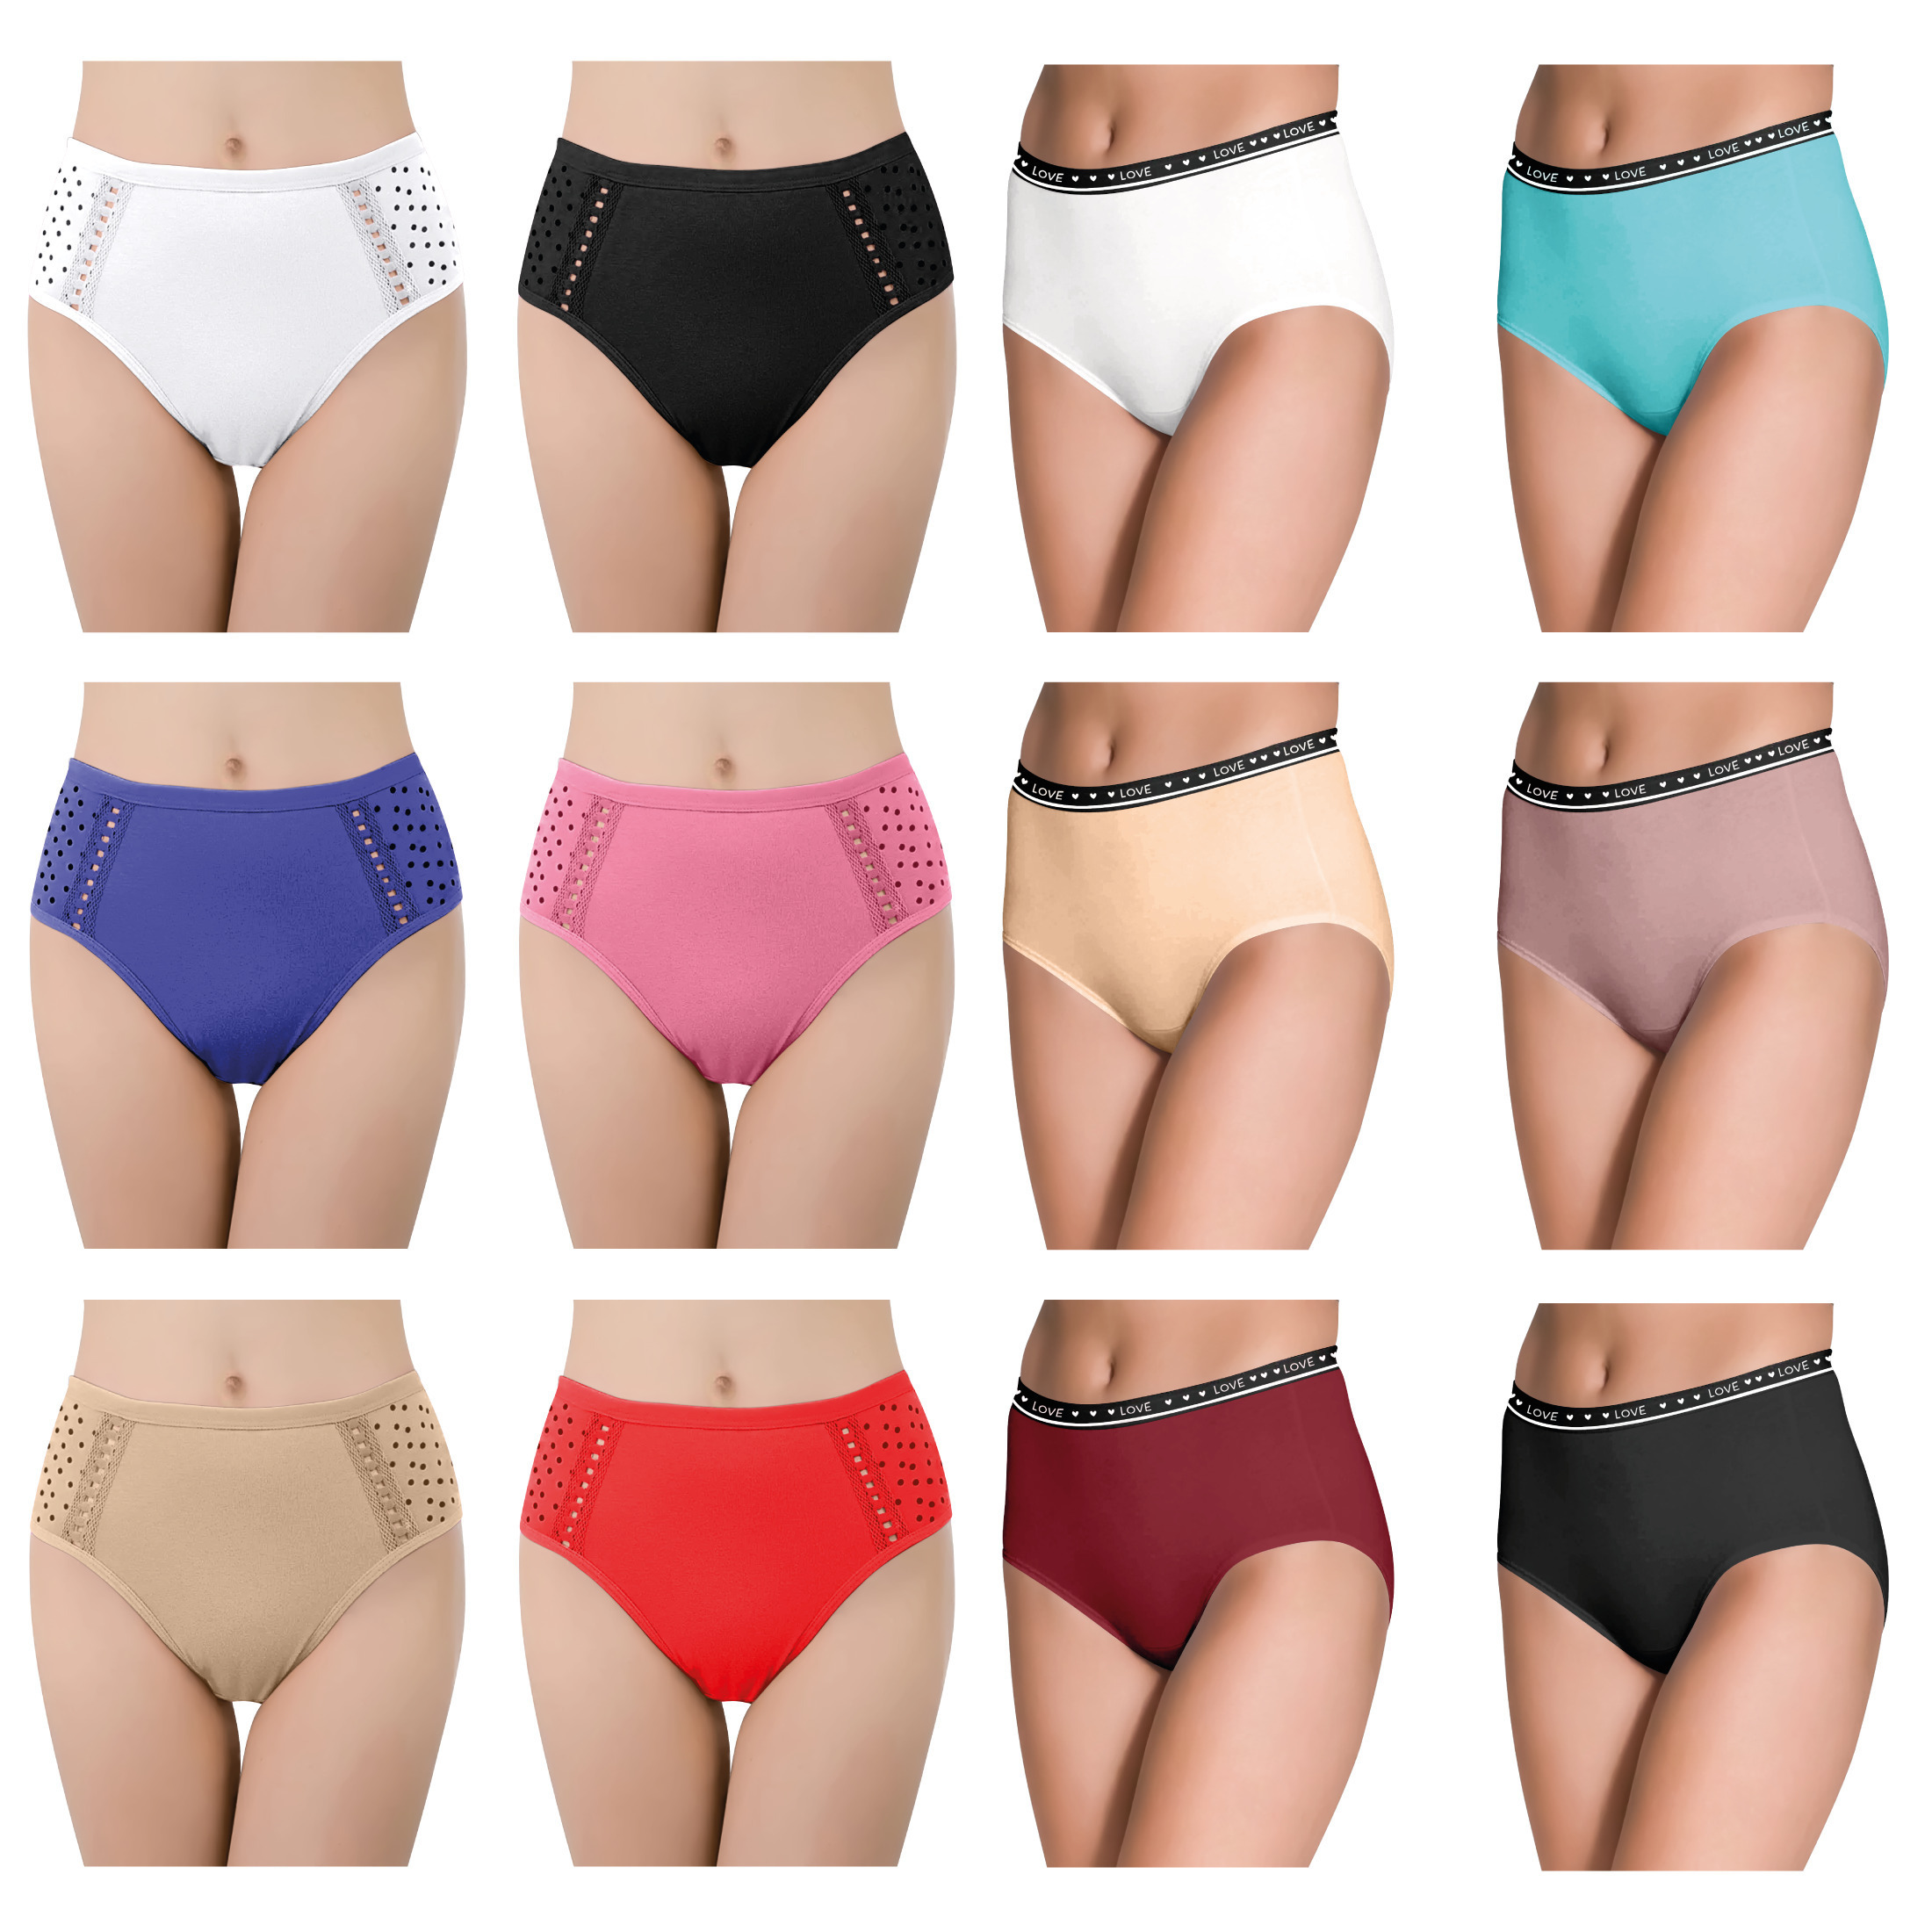 6-Pack: Women's Ultra Soft Moisture Wicking Panties Cotton Perfect Fit Underwear (Plus Sizes Available ) - XX-Large